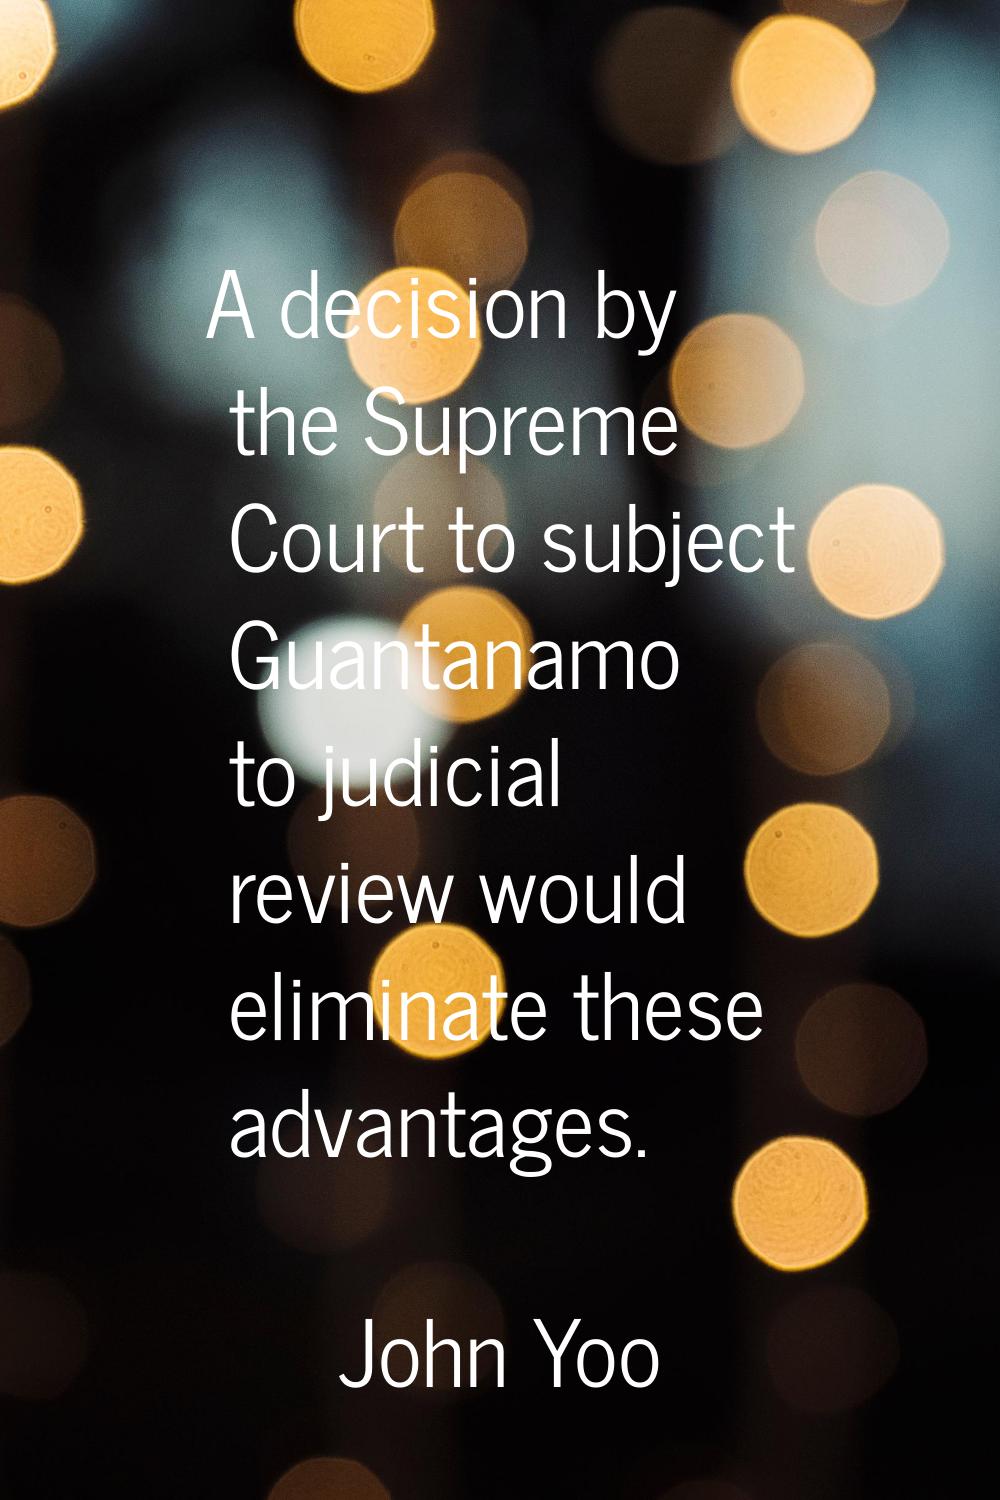 A decision by the Supreme Court to subject Guantanamo to judicial review would eliminate these adva